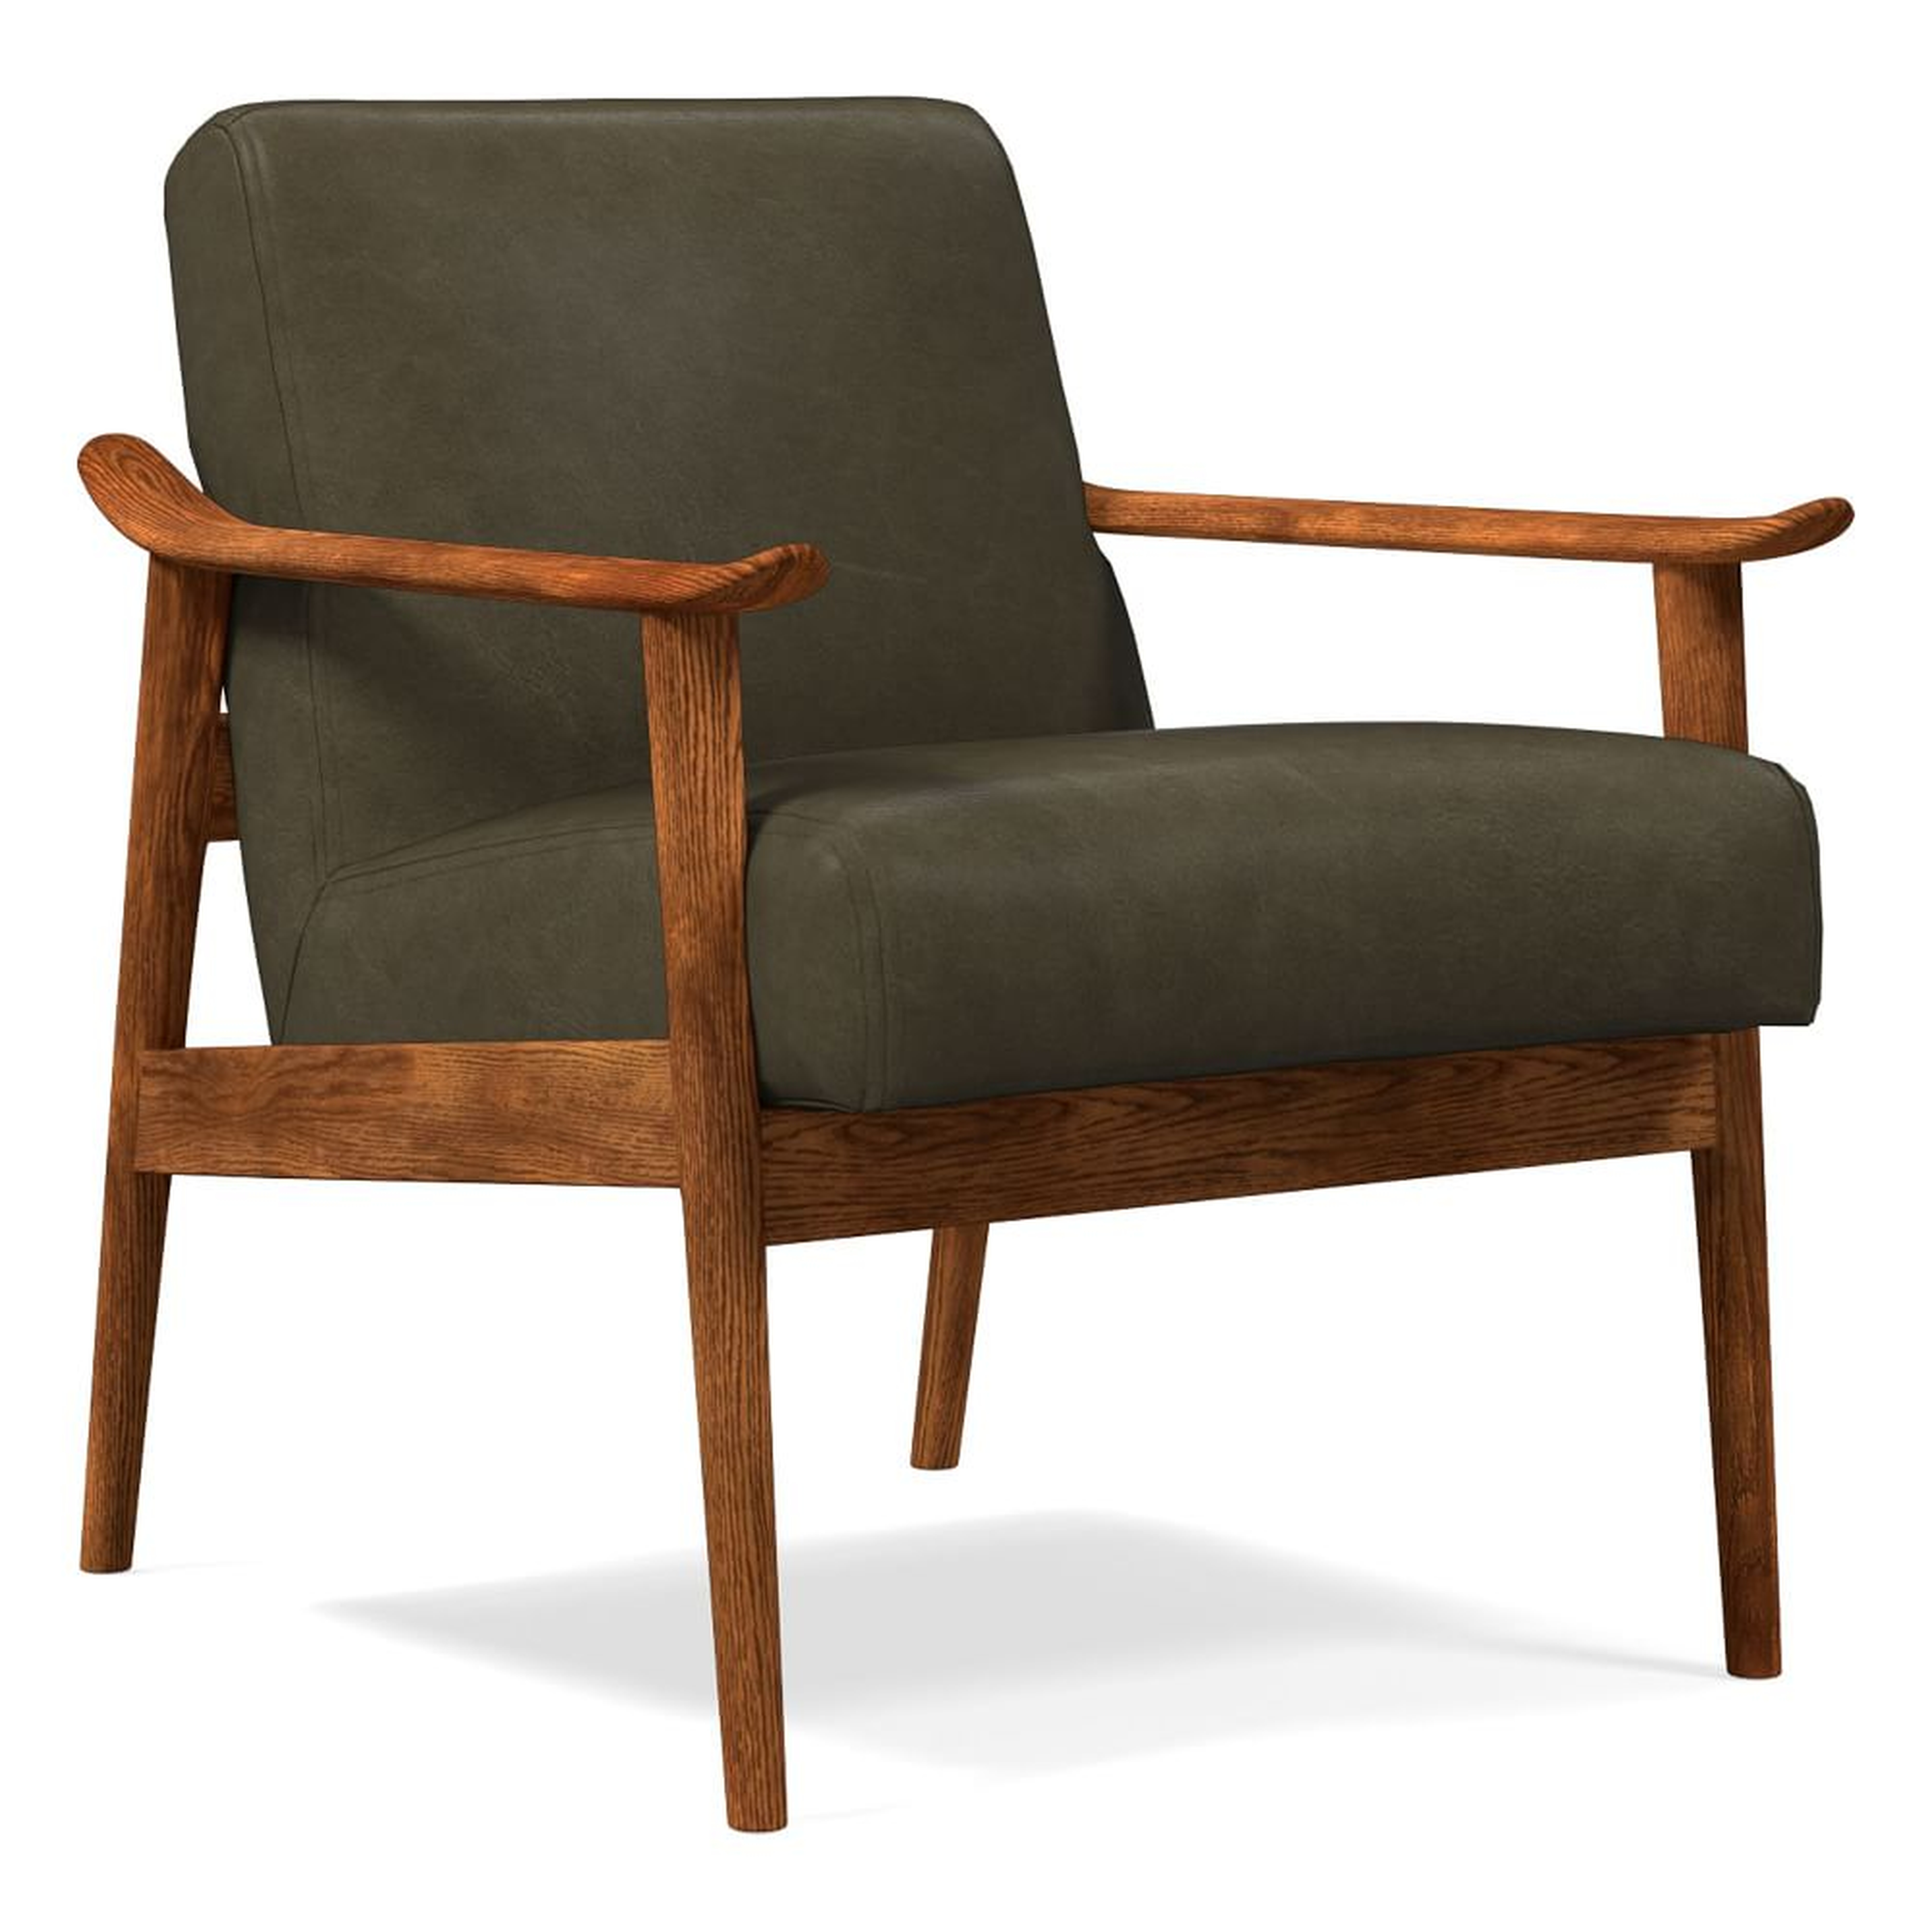 Midcentury Show Wood Chair, Poly, Saddle Leather, Slate, Pecan - West Elm